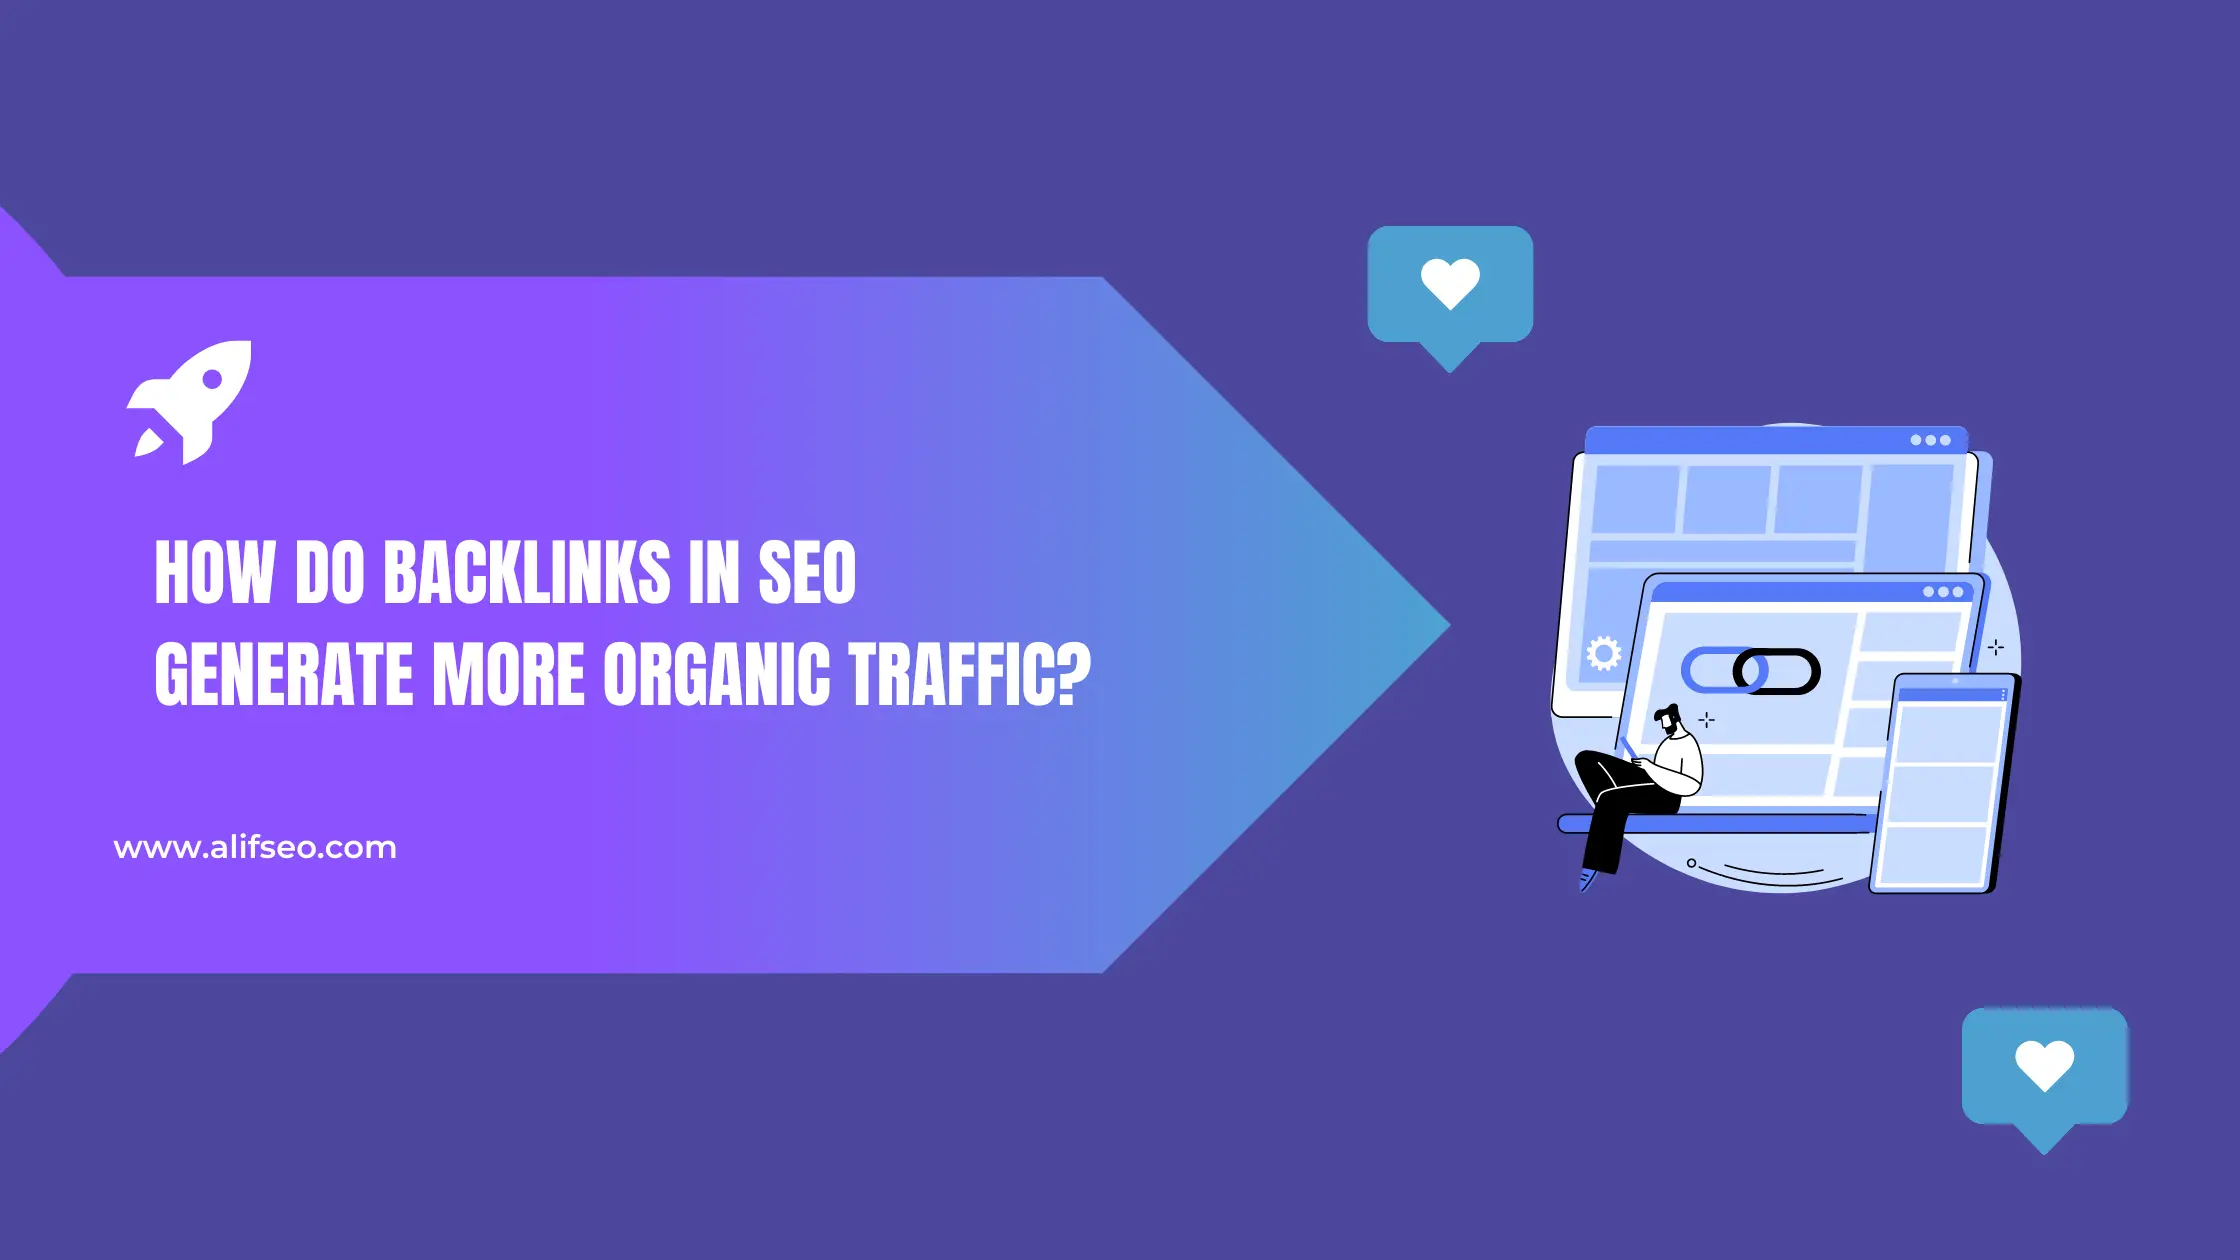 How do Backlinks in SEO Generate More Organic Traffic?